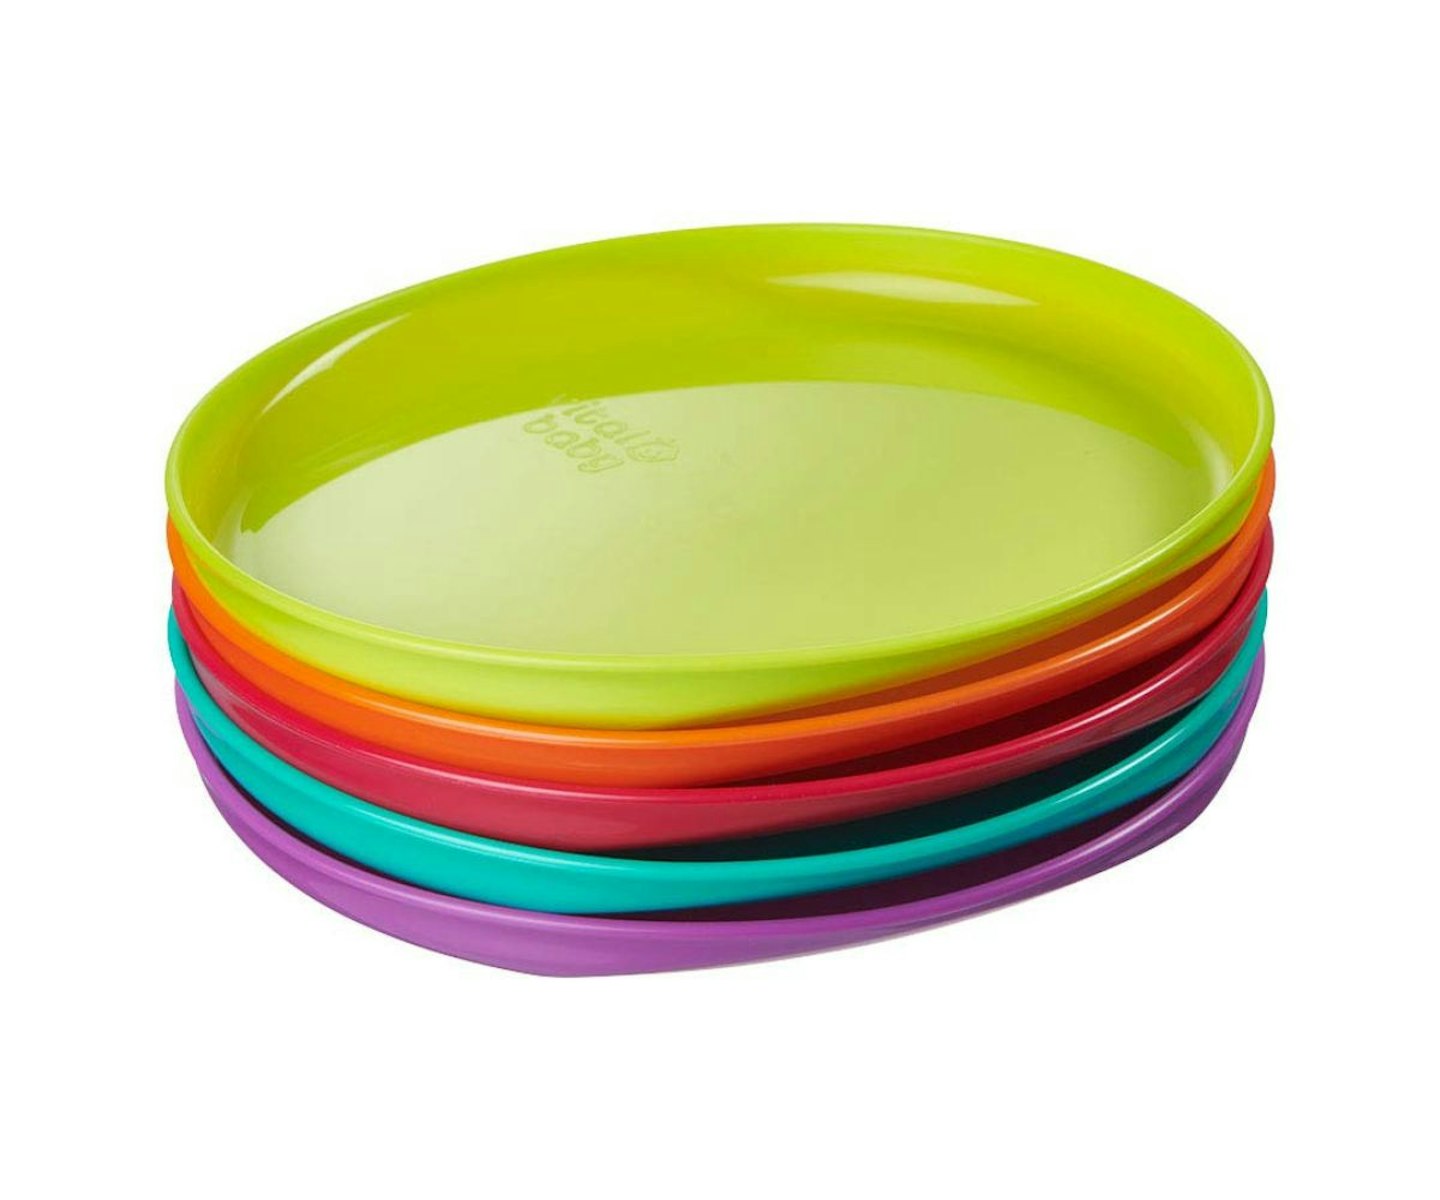 15 Best Toddler Plates 2023: For Making Meal Time Engaging